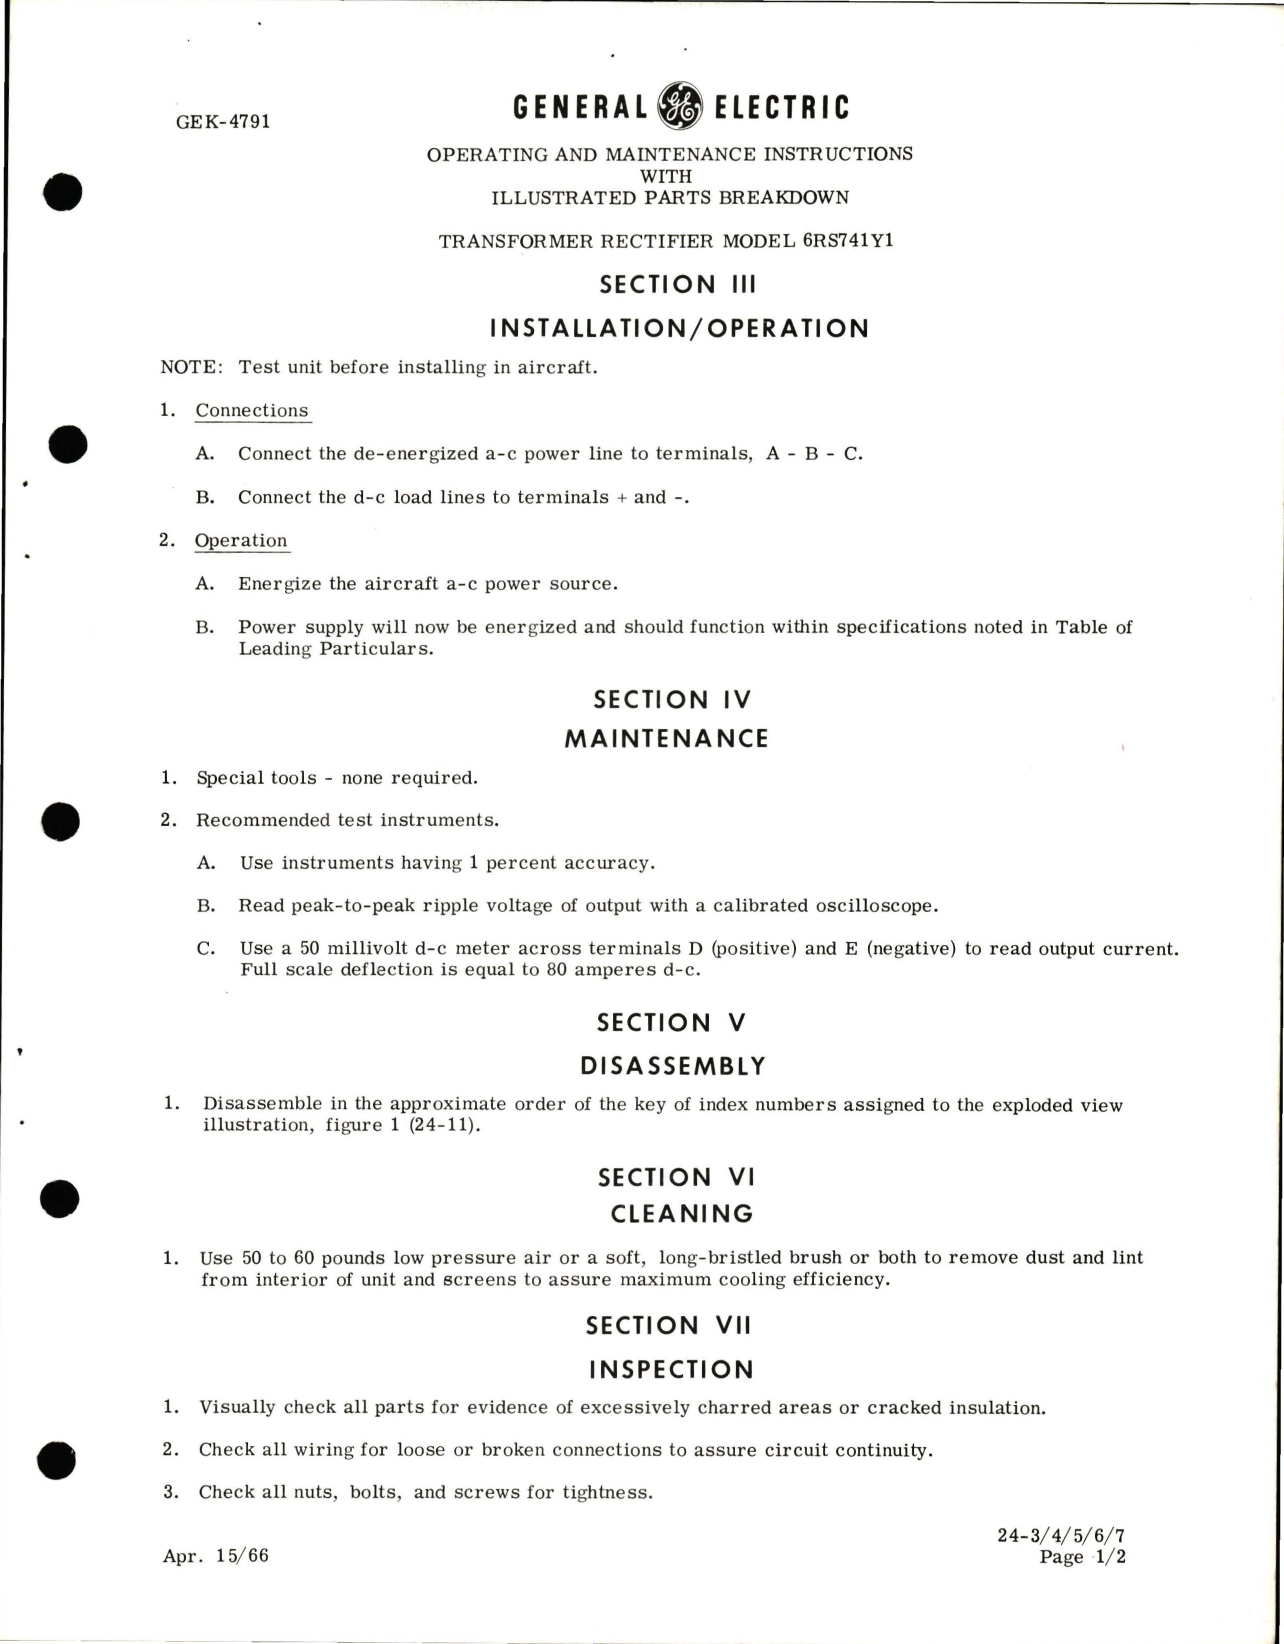 Sample page 5 from AirCorps Library document: Operating and Maintenance Instructions with Illustrated Parts for Transformer Rectifier - Model 6RS741Y1